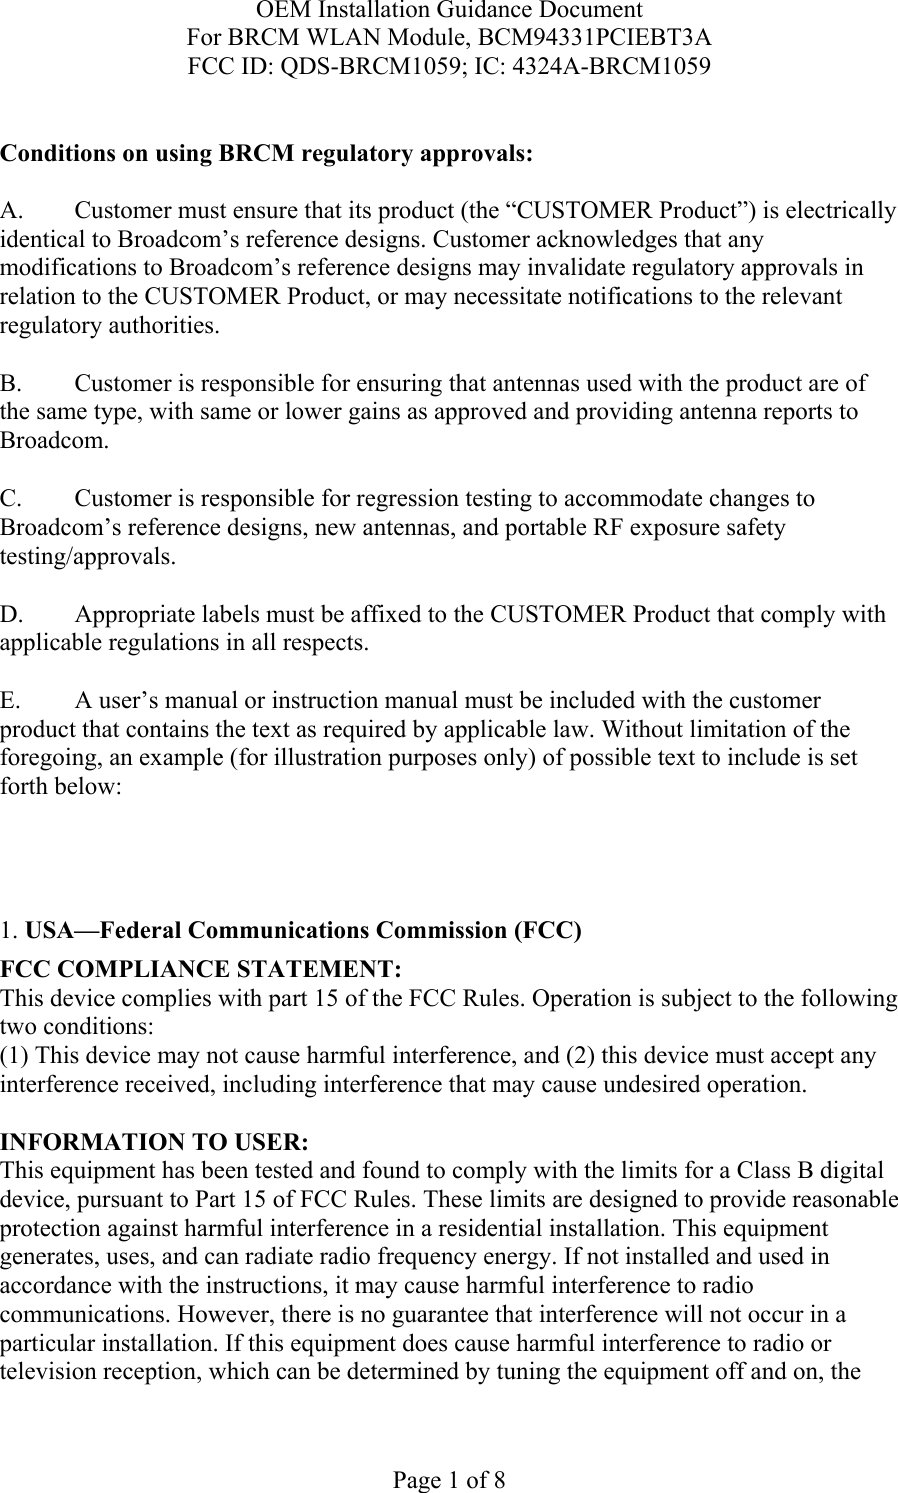 OEM Installation Guidance Document For BRCM WLAN Module, BCM94331PCIEBT3A FCC ID: QDS-BRCM1059; IC: 4324A-BRCM1059  Page 1 of 8  Conditions on using BRCM regulatory approvals:   A.  Customer must ensure that its product (the “CUSTOMER Product”) is electrically identical to Broadcom’s reference designs. Customer acknowledges that any modifications to Broadcom’s reference designs may invalidate regulatory approvals in relation to the CUSTOMER Product, or may necessitate notifications to the relevant regulatory authorities.  B.   Customer is responsible for ensuring that antennas used with the product are of the same type, with same or lower gains as approved and providing antenna reports to Broadcom.  C.   Customer is responsible for regression testing to accommodate changes to Broadcom’s reference designs, new antennas, and portable RF exposure safety testing/approvals.  D.  Appropriate labels must be affixed to the CUSTOMER Product that comply with applicable regulations in all respects.    E.  A user’s manual or instruction manual must be included with the customer product that contains the text as required by applicable law. Without limitation of the foregoing, an example (for illustration purposes only) of possible text to include is set forth below:      1. USA—Federal Communications Commission (FCC) FCC COMPLIANCE STATEMENT: This device complies with part 15 of the FCC Rules. Operation is subject to the following two conditions: (1) This device may not cause harmful interference, and (2) this device must accept any interference received, including interference that may cause undesired operation.  INFORMATION TO USER: This equipment has been tested and found to comply with the limits for a Class B digital device, pursuant to Part 15 of FCC Rules. These limits are designed to provide reasonable protection against harmful interference in a residential installation. This equipment generates, uses, and can radiate radio frequency energy. If not installed and used in accordance with the instructions, it may cause harmful interference to radio communications. However, there is no guarantee that interference will not occur in a particular installation. If this equipment does cause harmful interference to radio or television reception, which can be determined by tuning the equipment off and on, the 